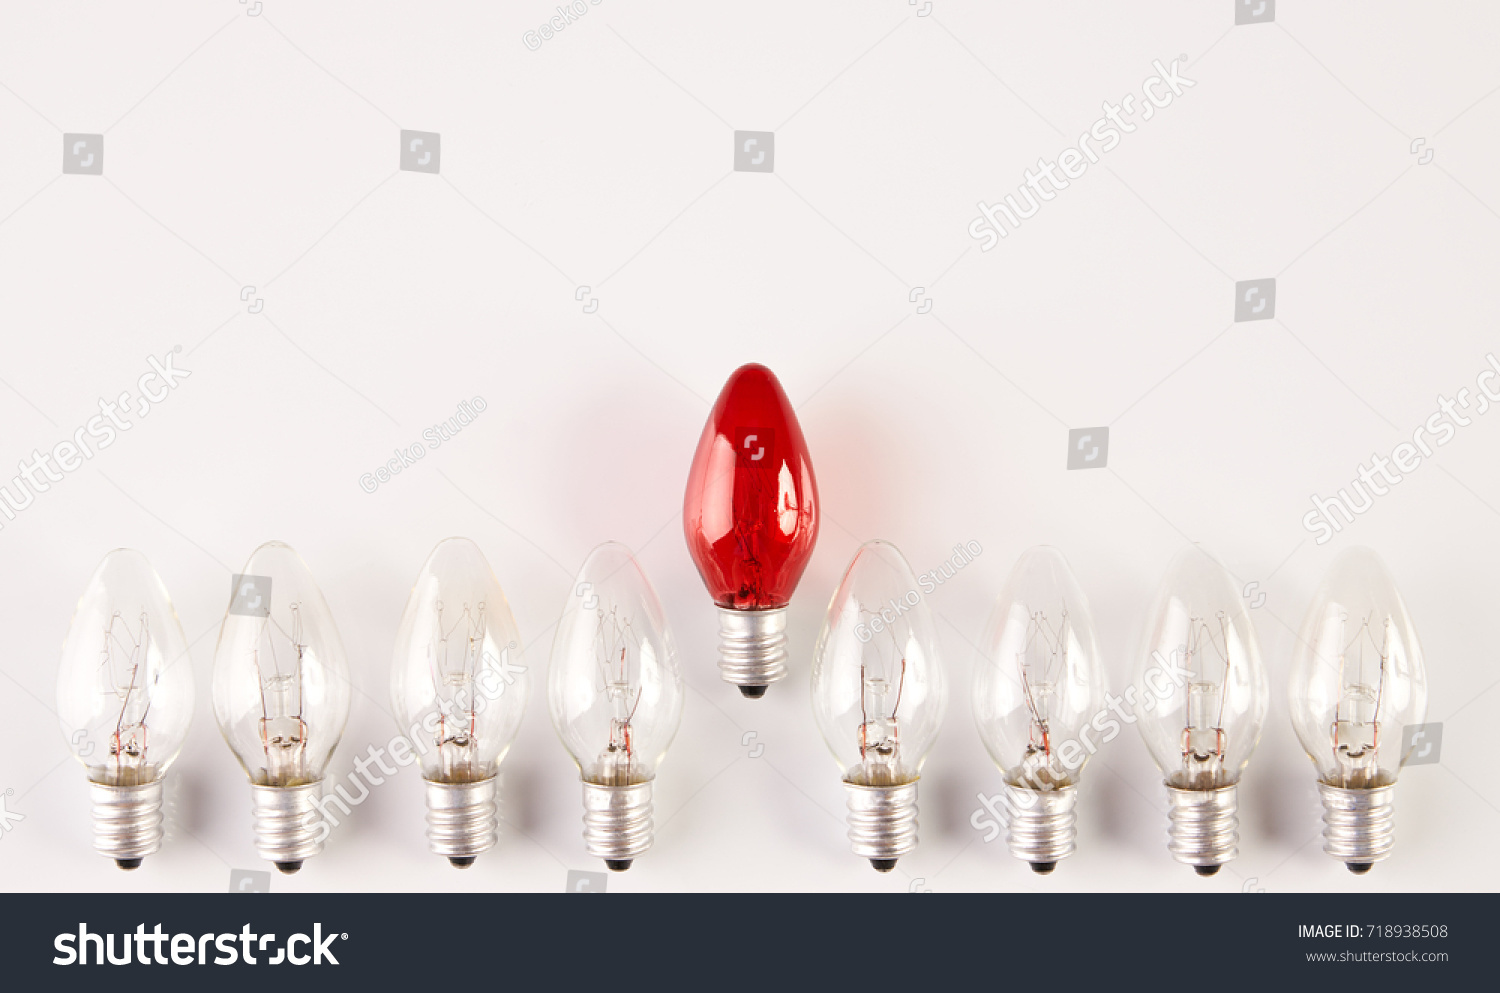 Creativity inspiration, ideas concepts with lightbulb. Idea and leadership concept. The concept of the business idea. #718938508